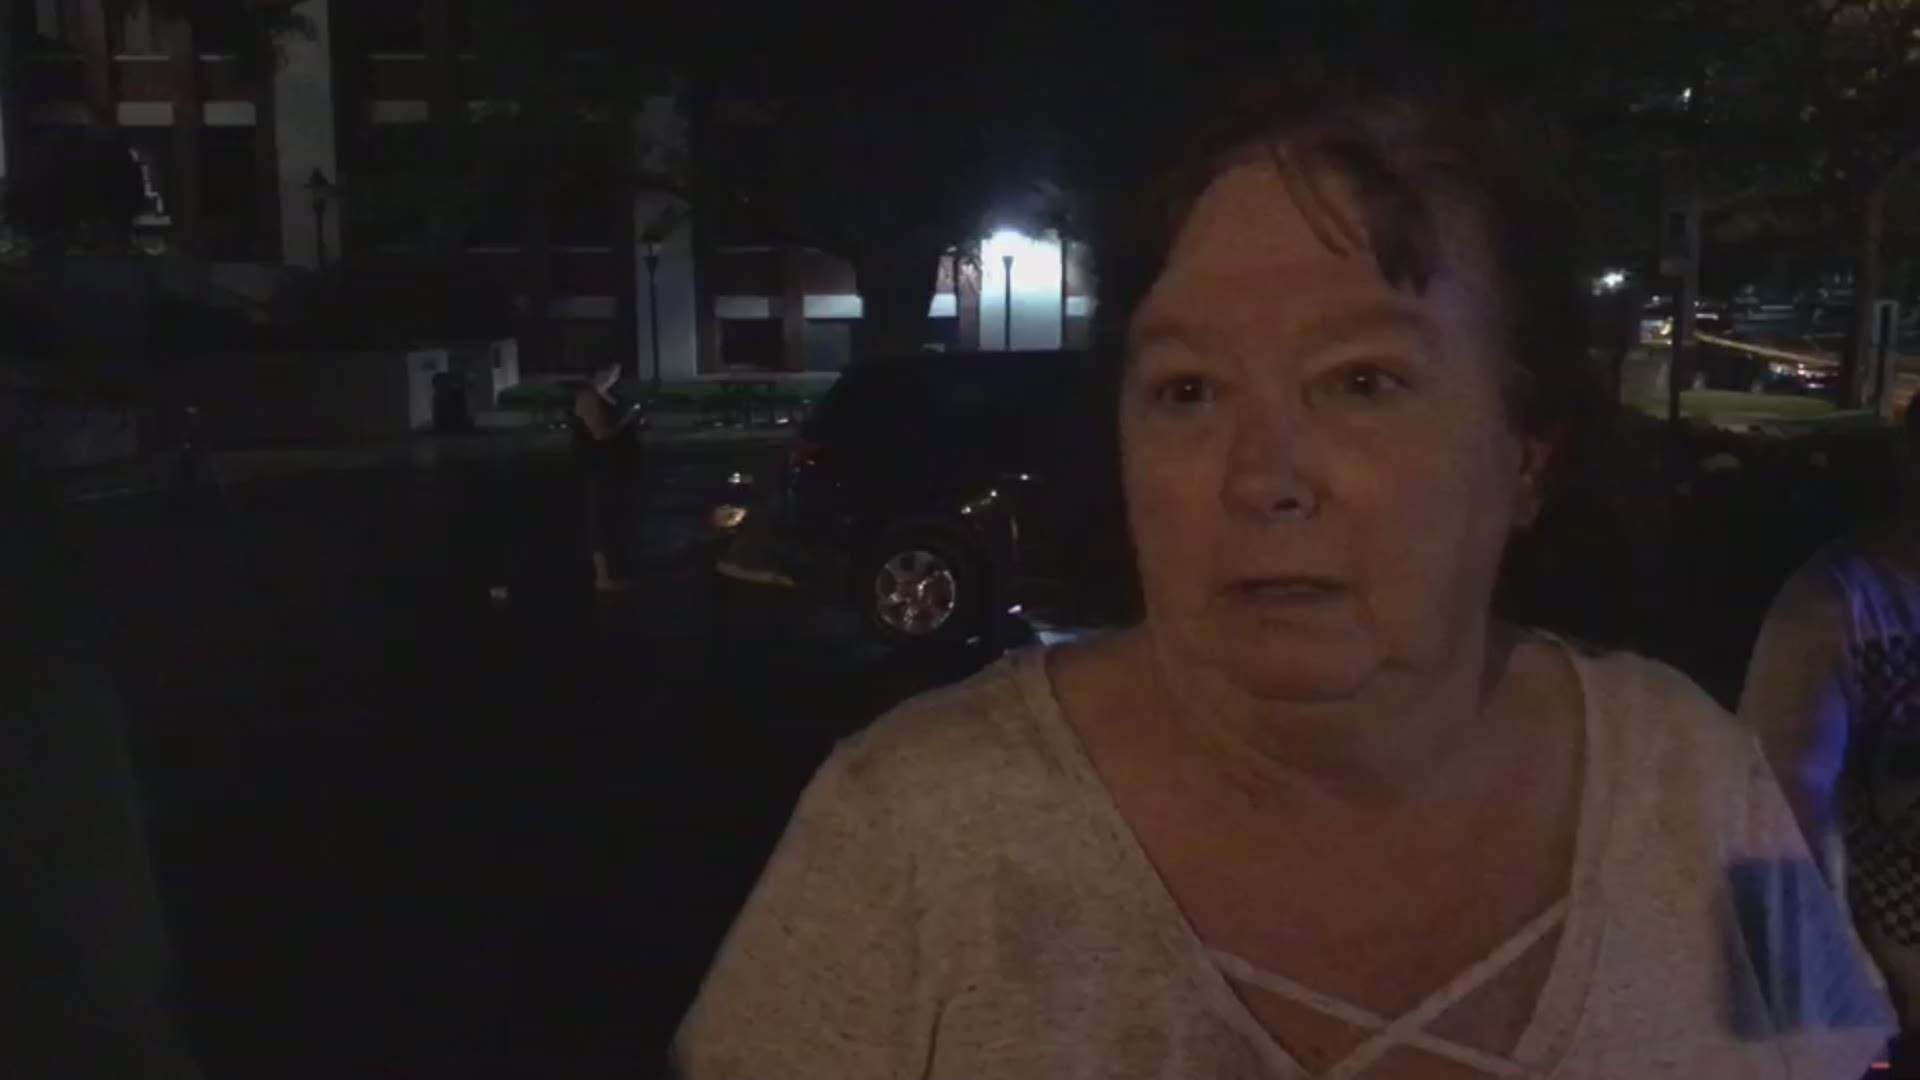 Woman's windshield was hit by stray bullet